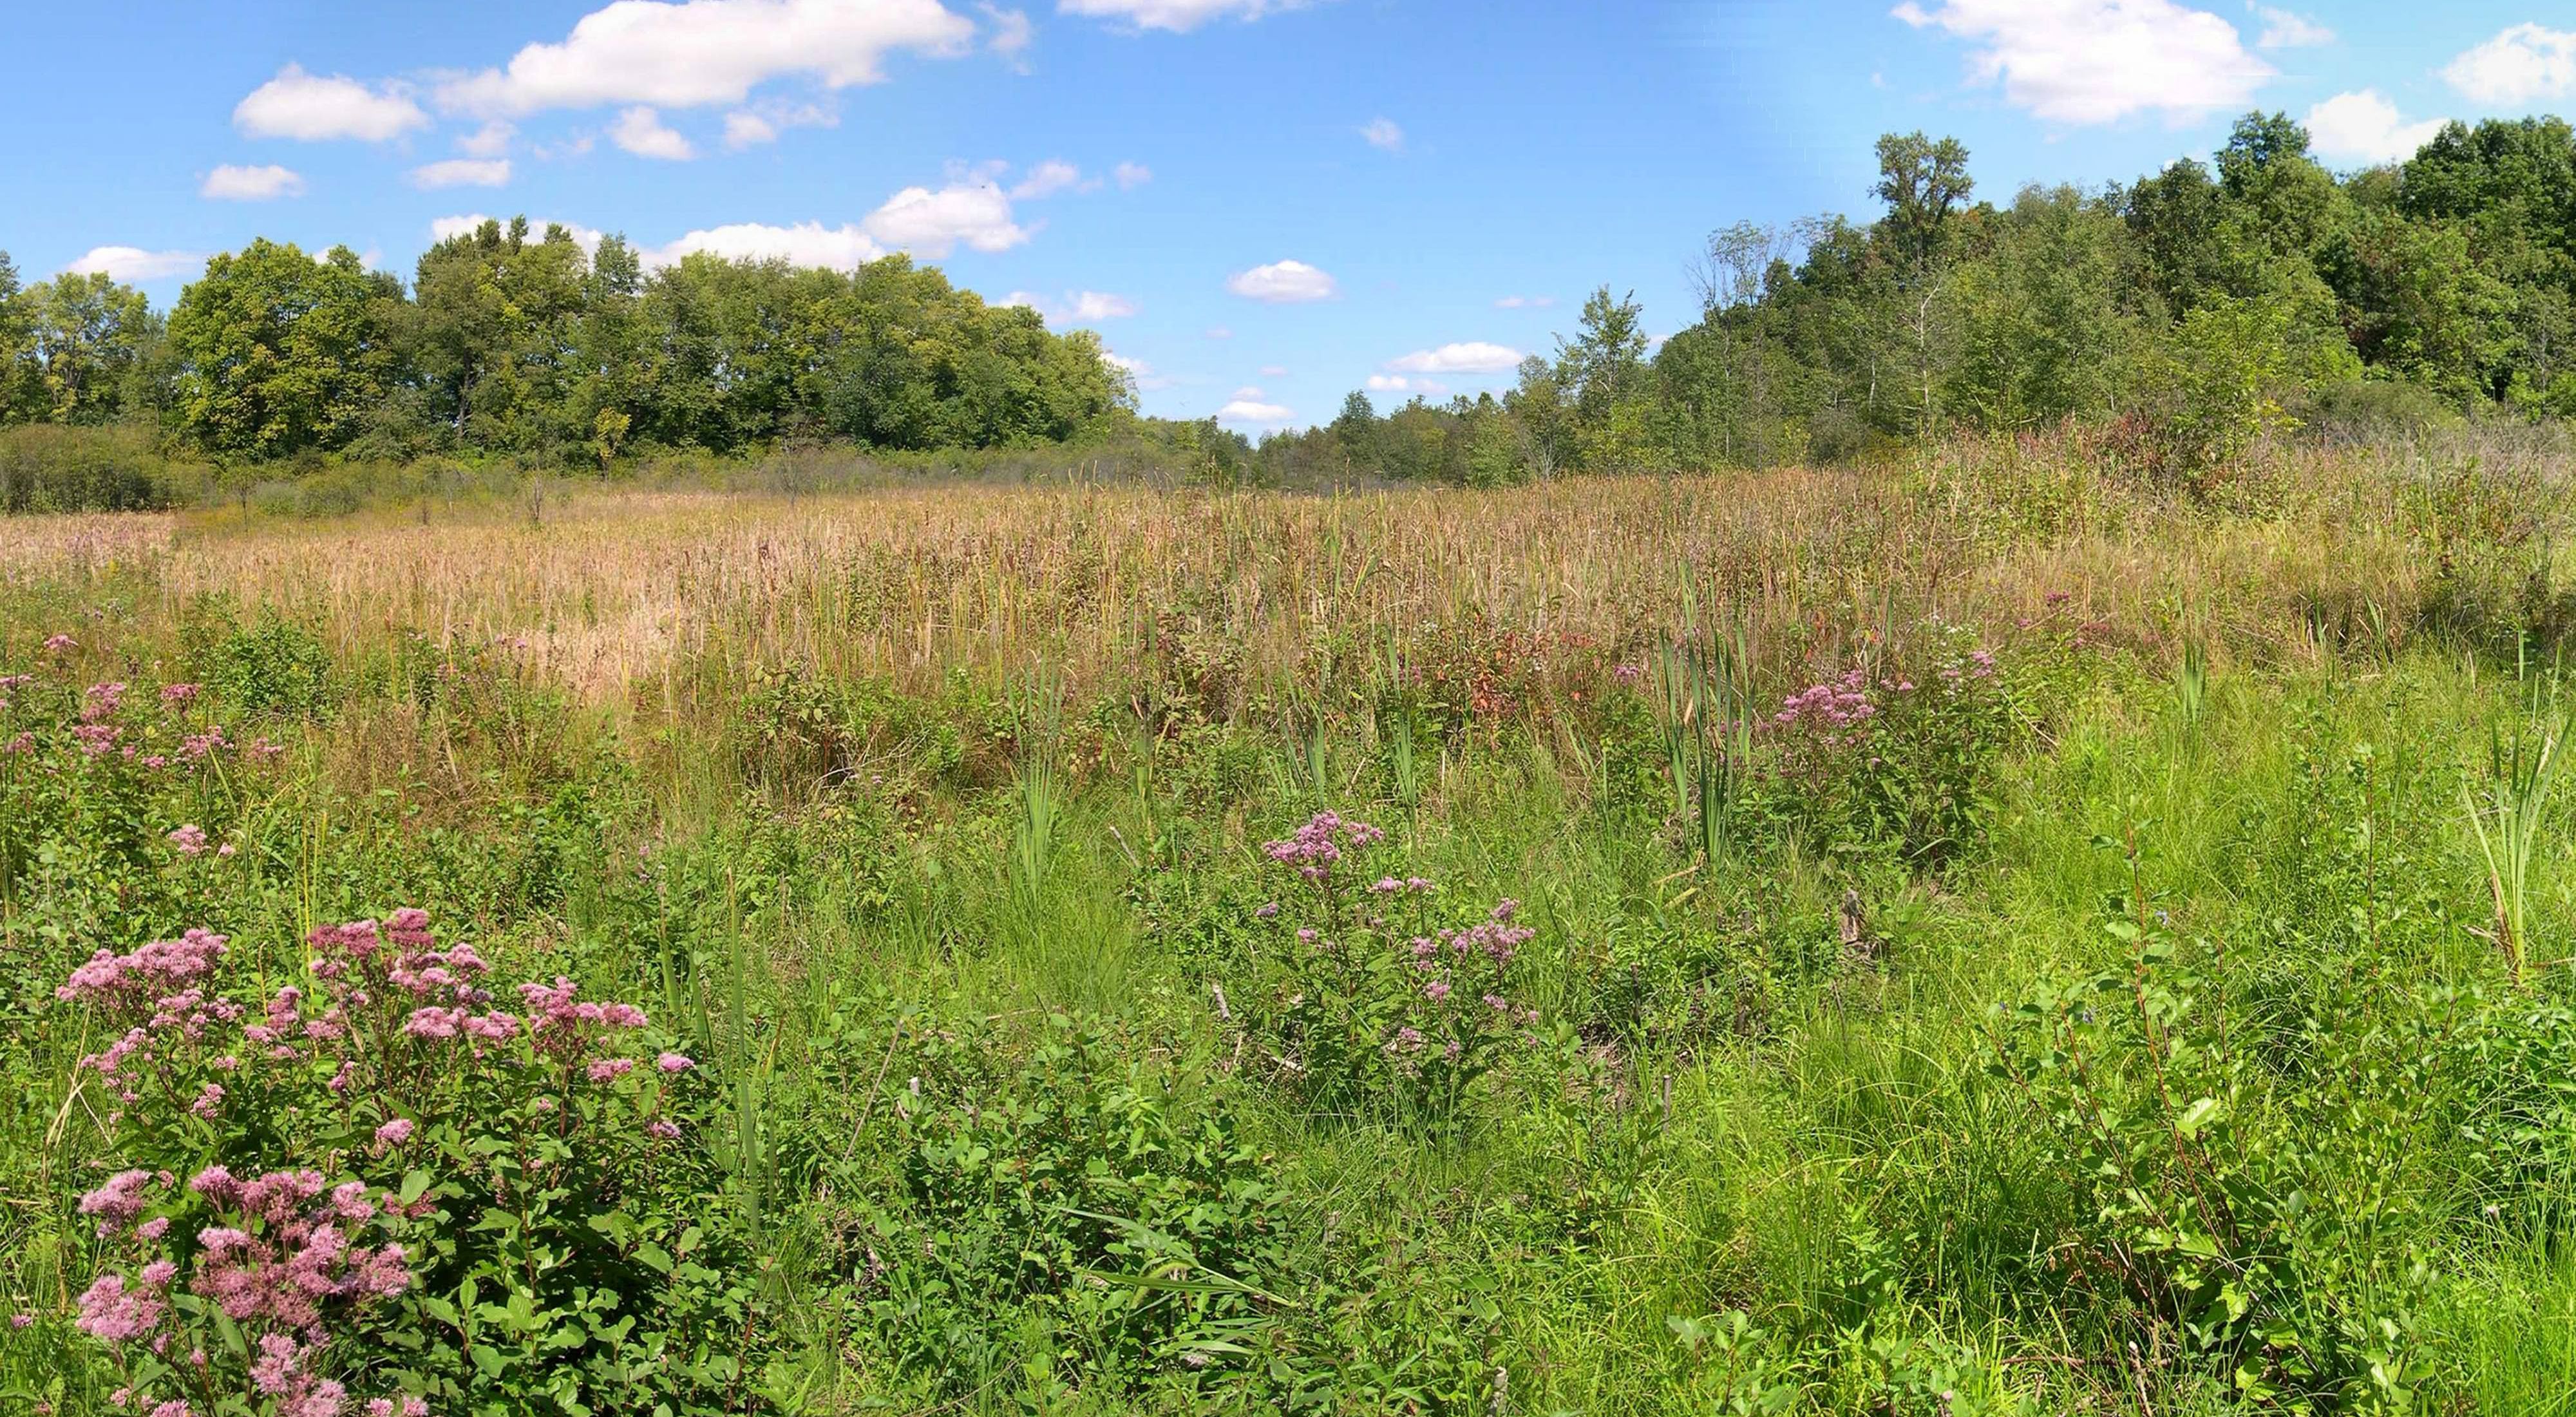 Summer wildflowers, grasses and plants in bloom at the prairie fen of Ives Road Fen Preserve.